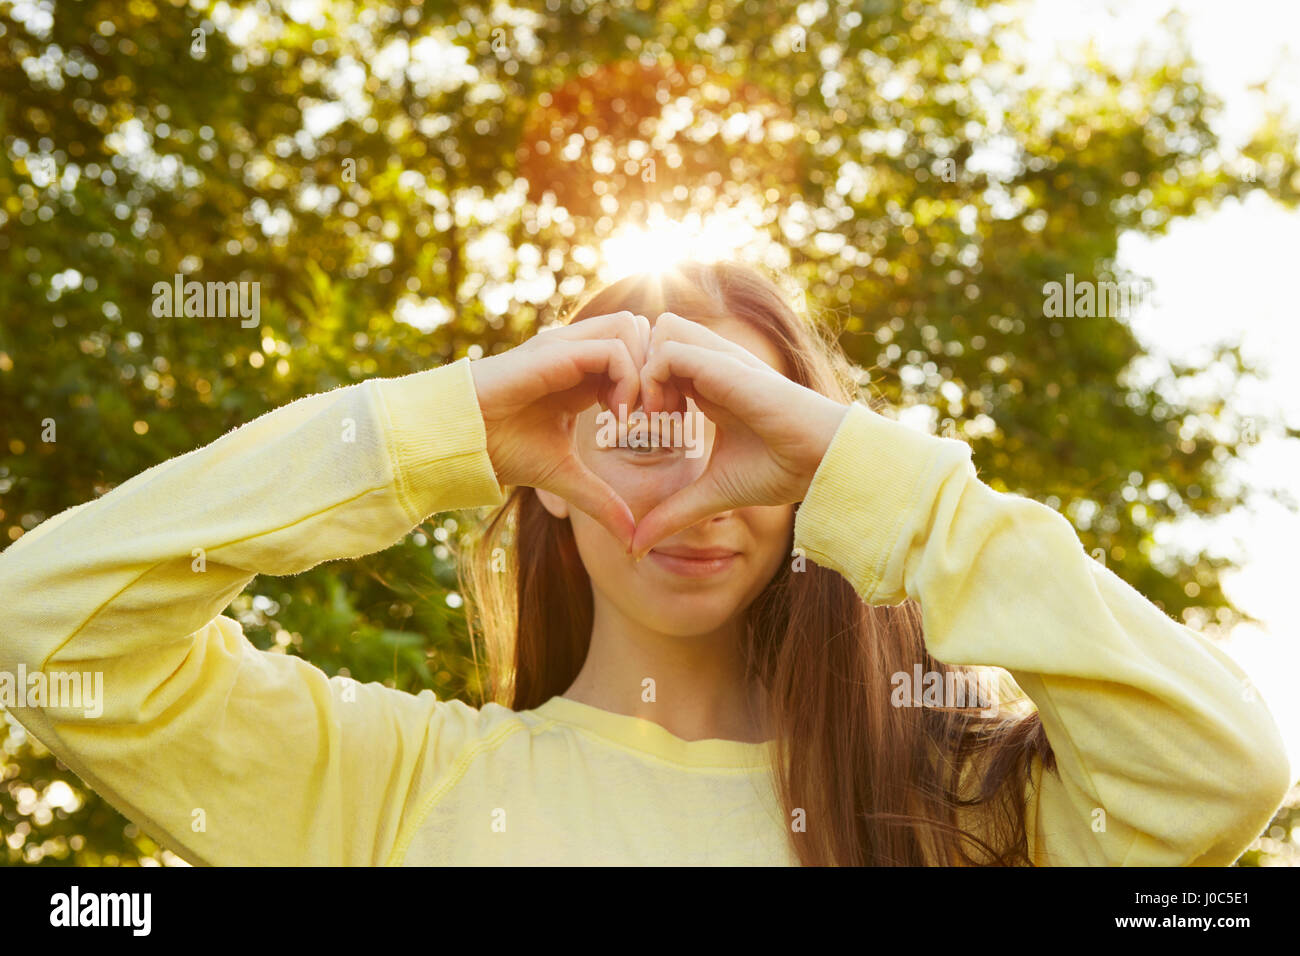 Portrait of girl making heart shape with hands in park Stock Photo